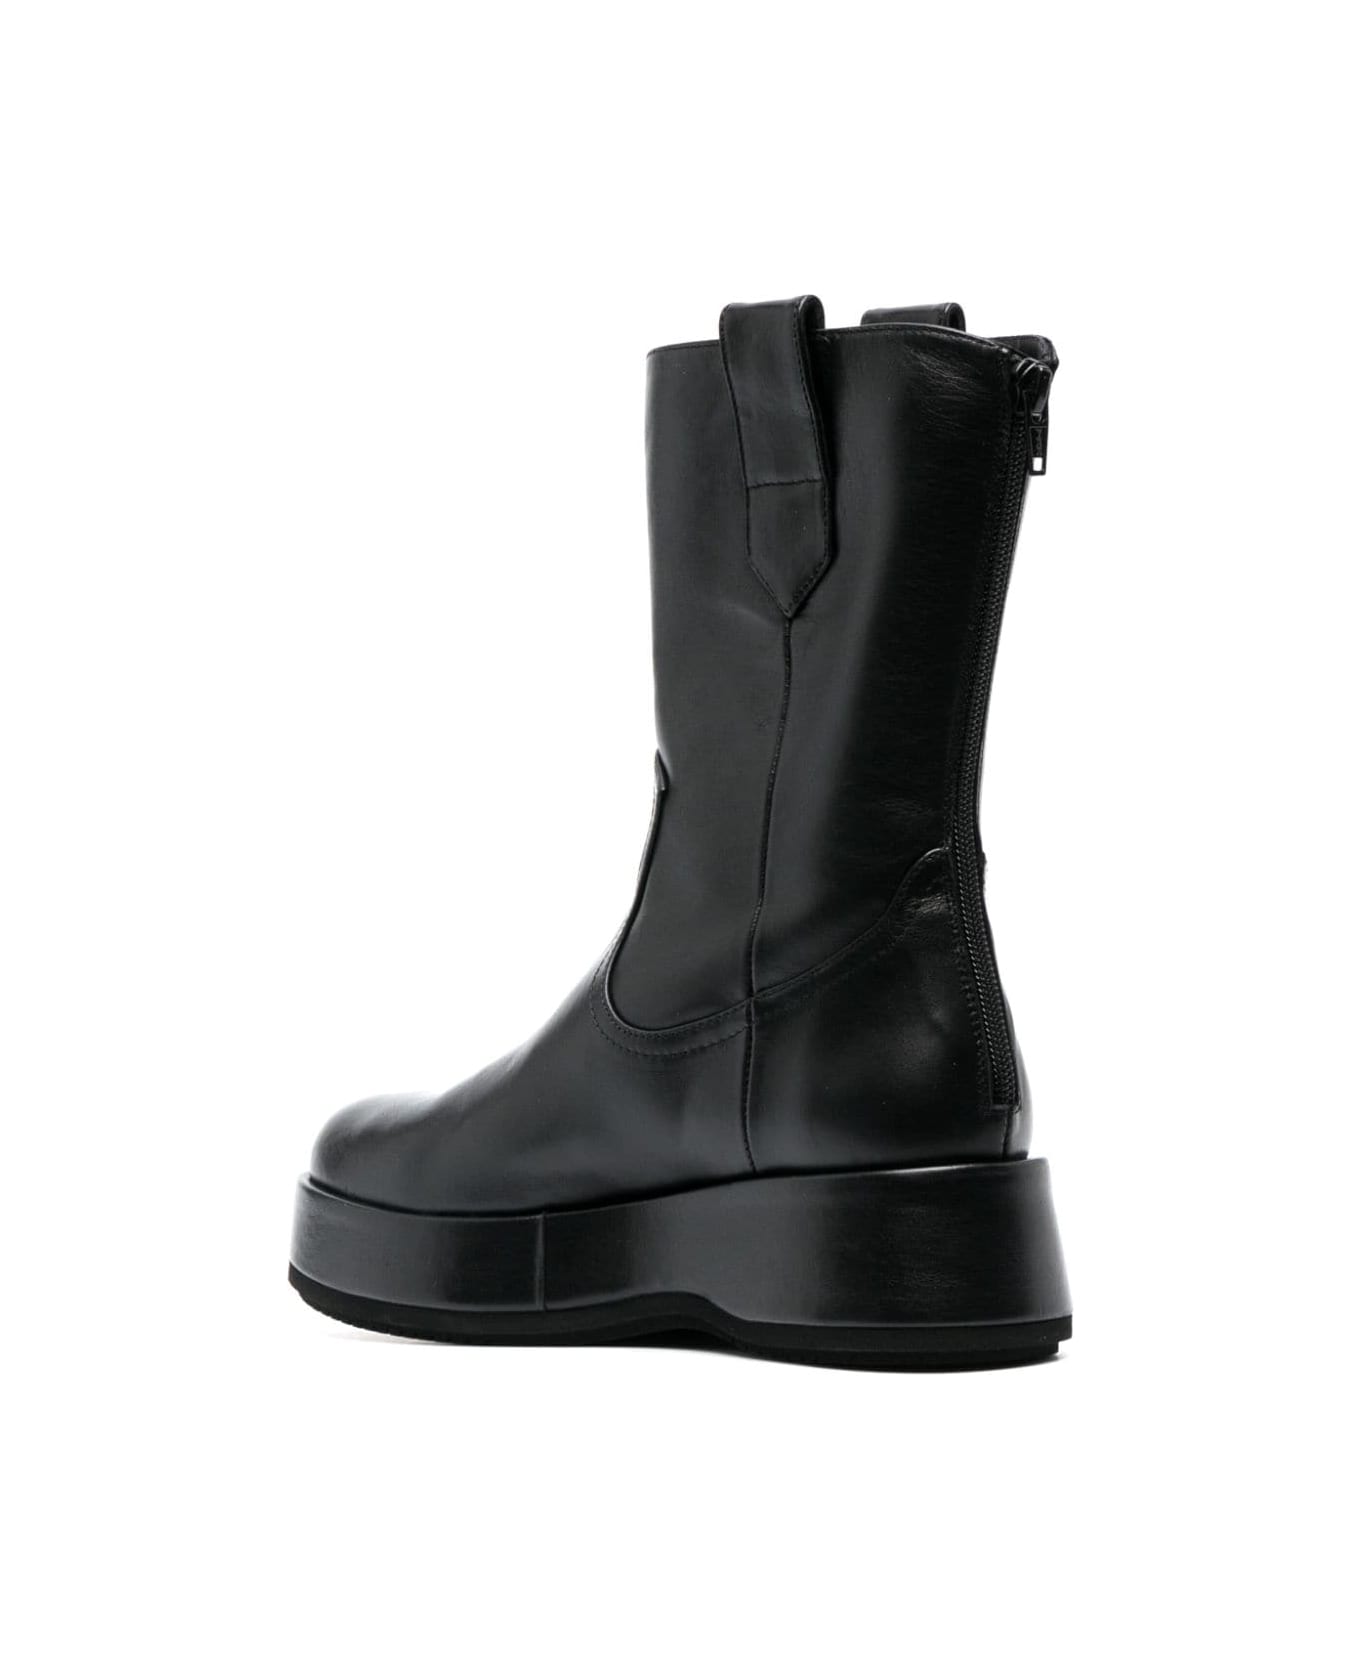 Paloma Barceló Ander Ankle Boots - Black